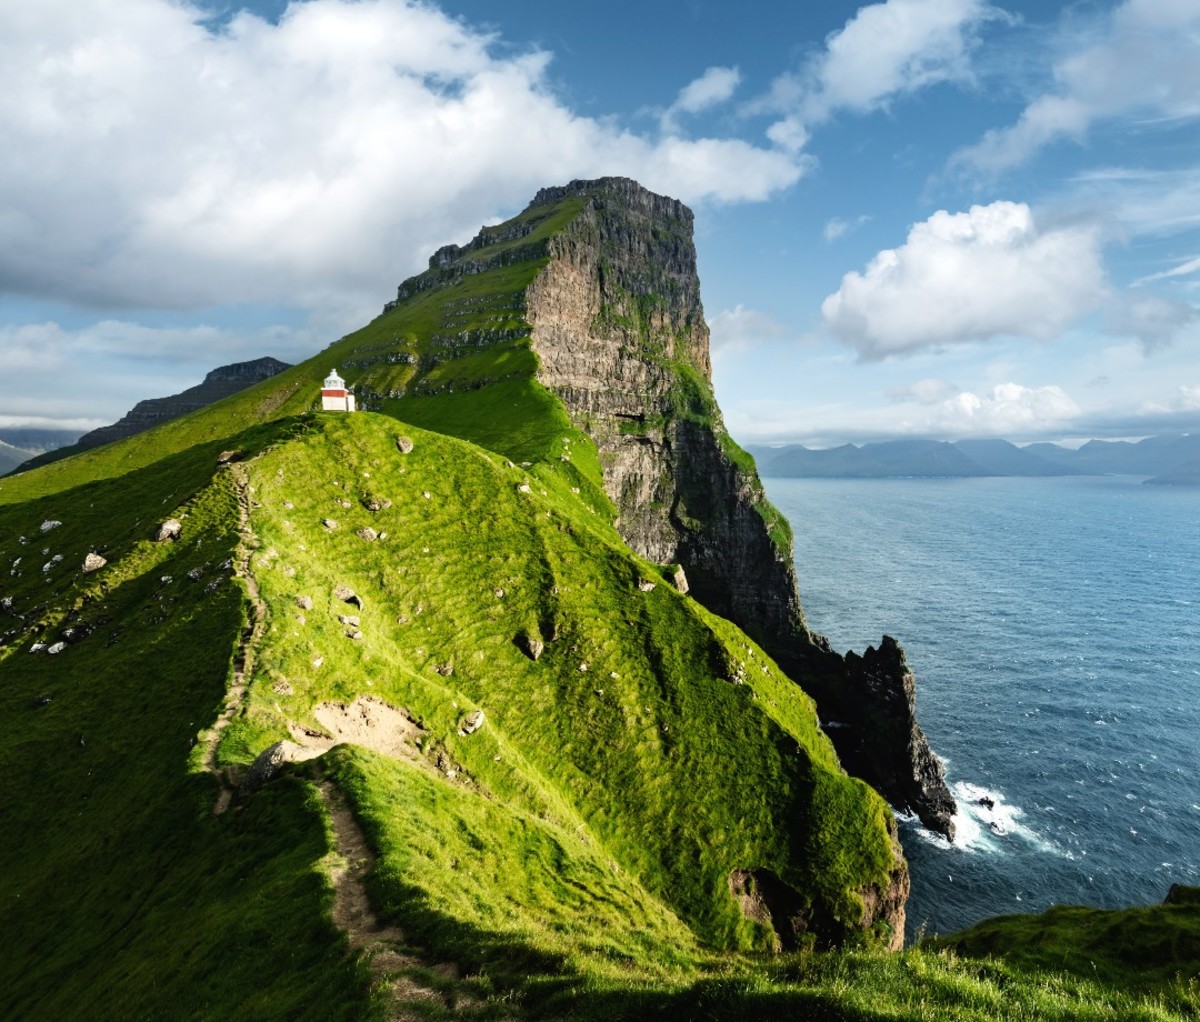 The Kallur lighthouse on the Faroese island of Kalsoy.